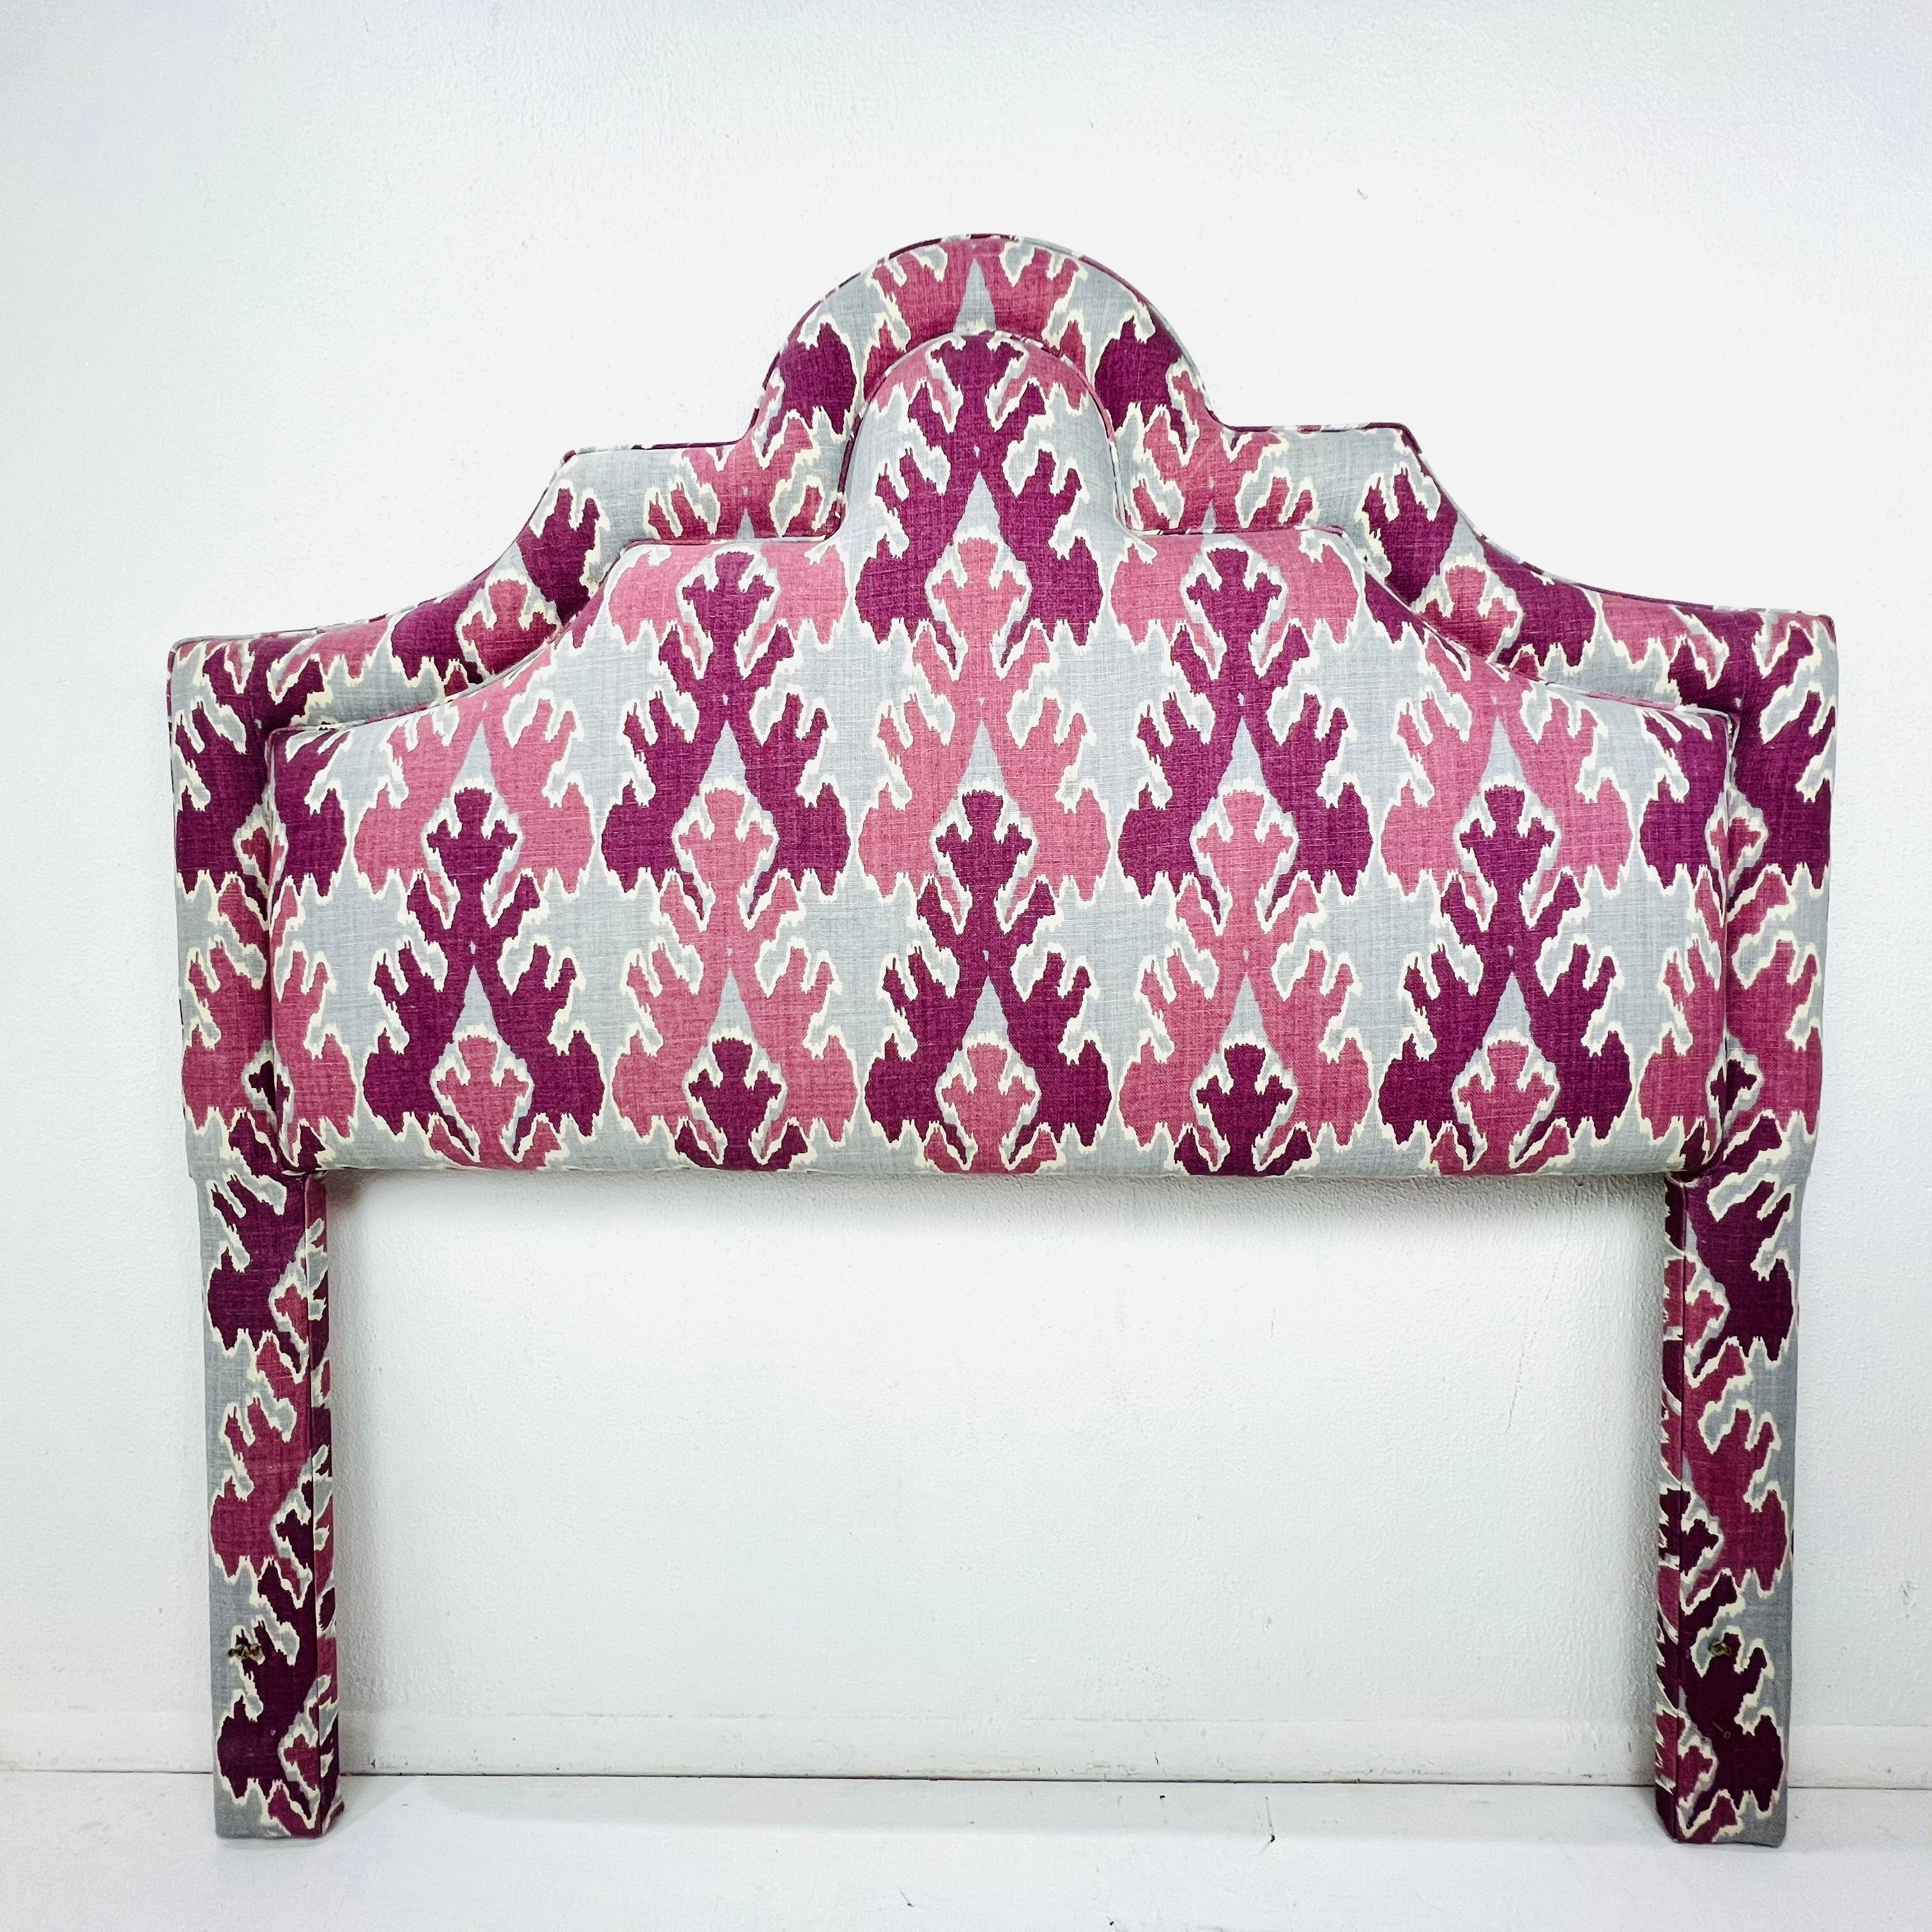 Queen Headboard Upholstered in Magenta Kelly Wearstler Fabric In Good Condition For Sale In Dallas, TX